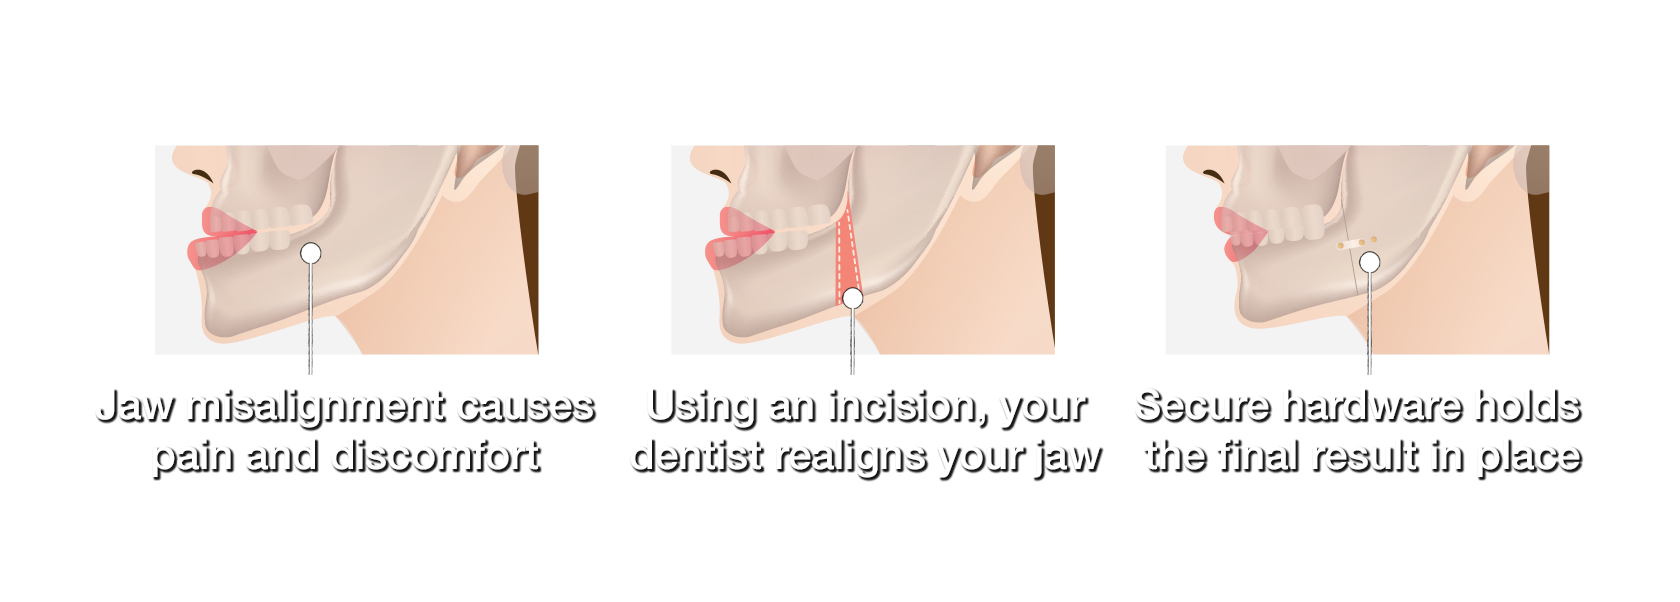 diagram explaining jaw surgery for jaw misalignment